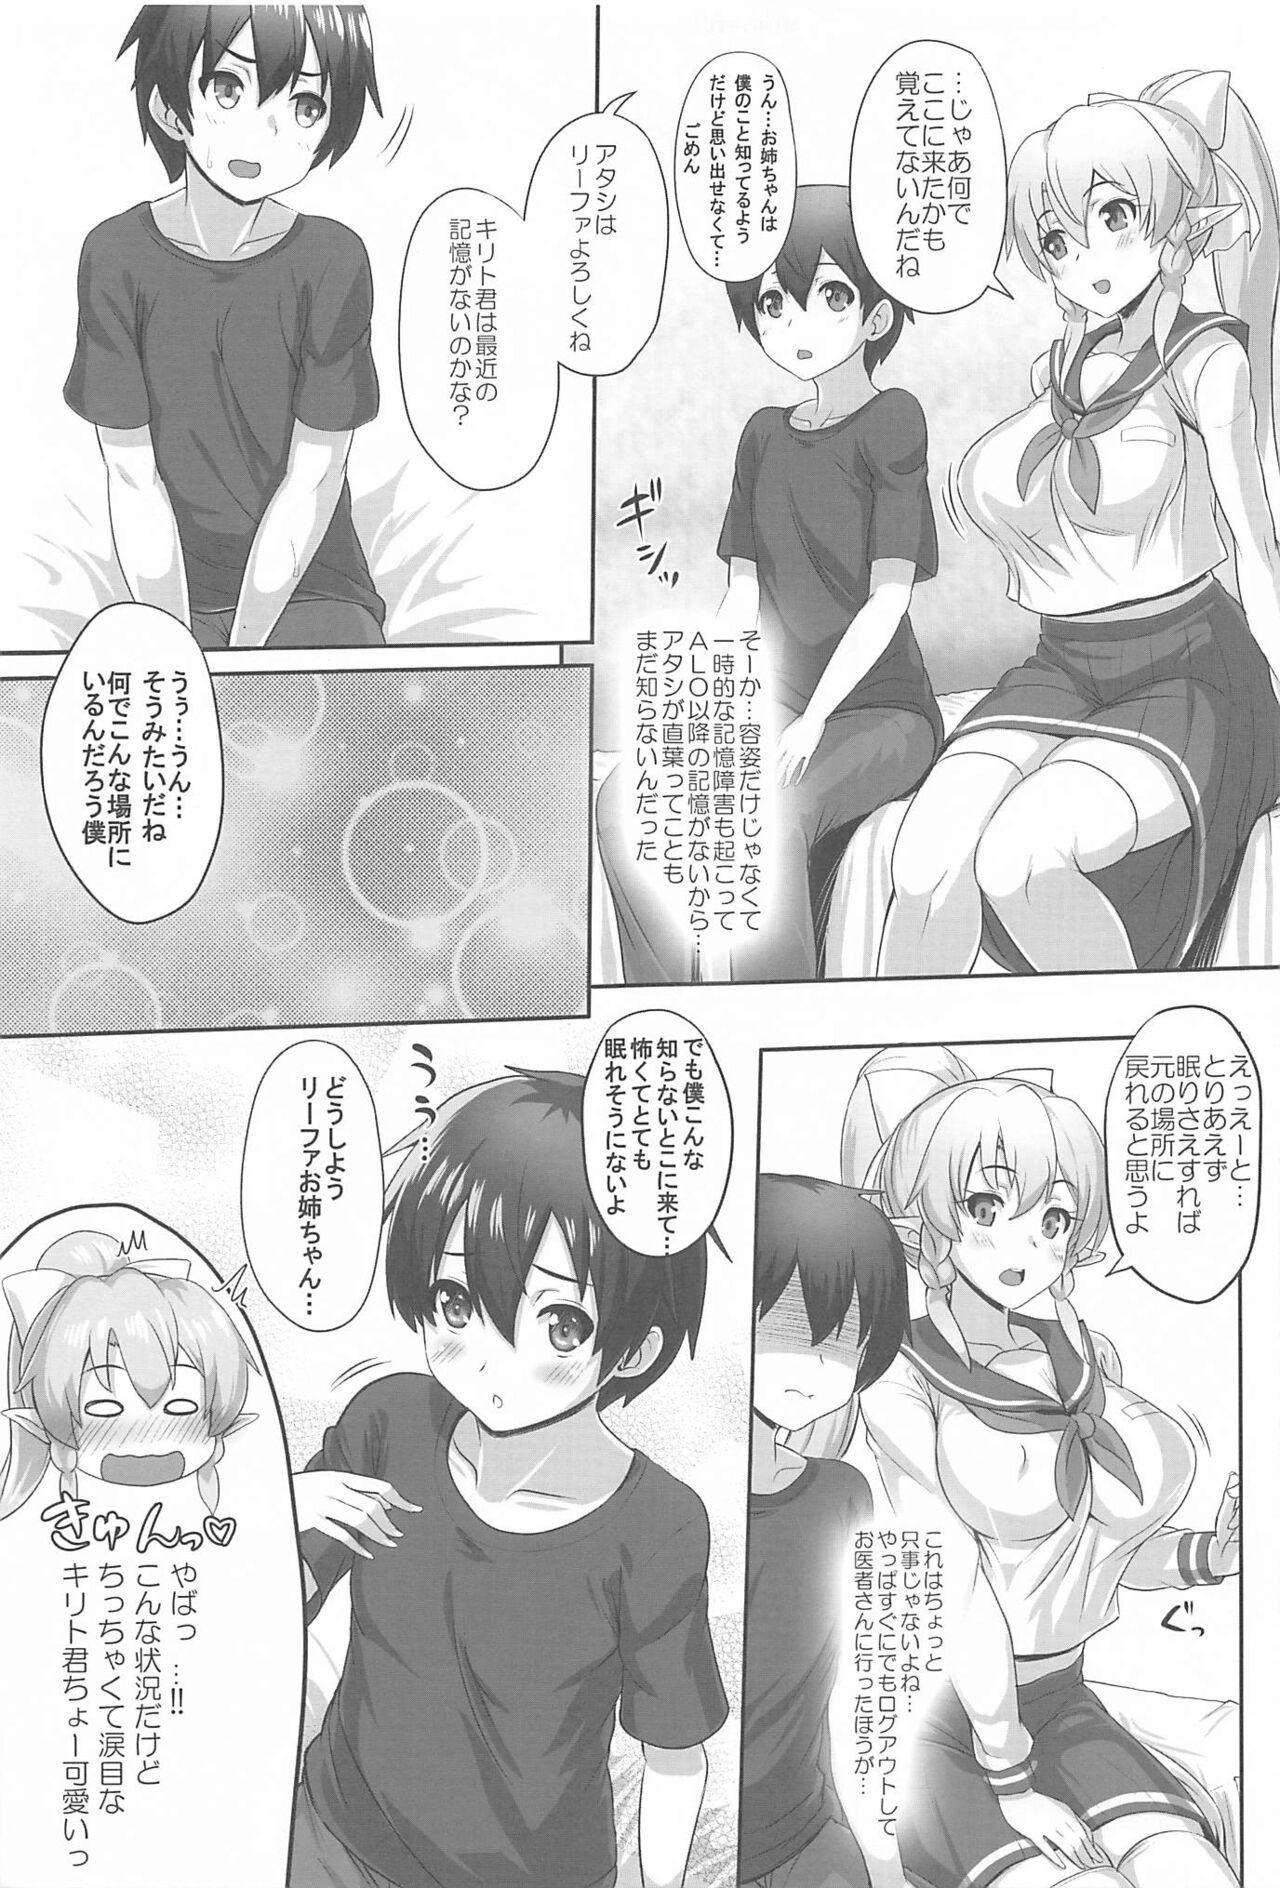 Pigtails Sister Affection On&Off 3 SAO Soushuuhen - Sword art online Hot Girl Pussy - Page 6